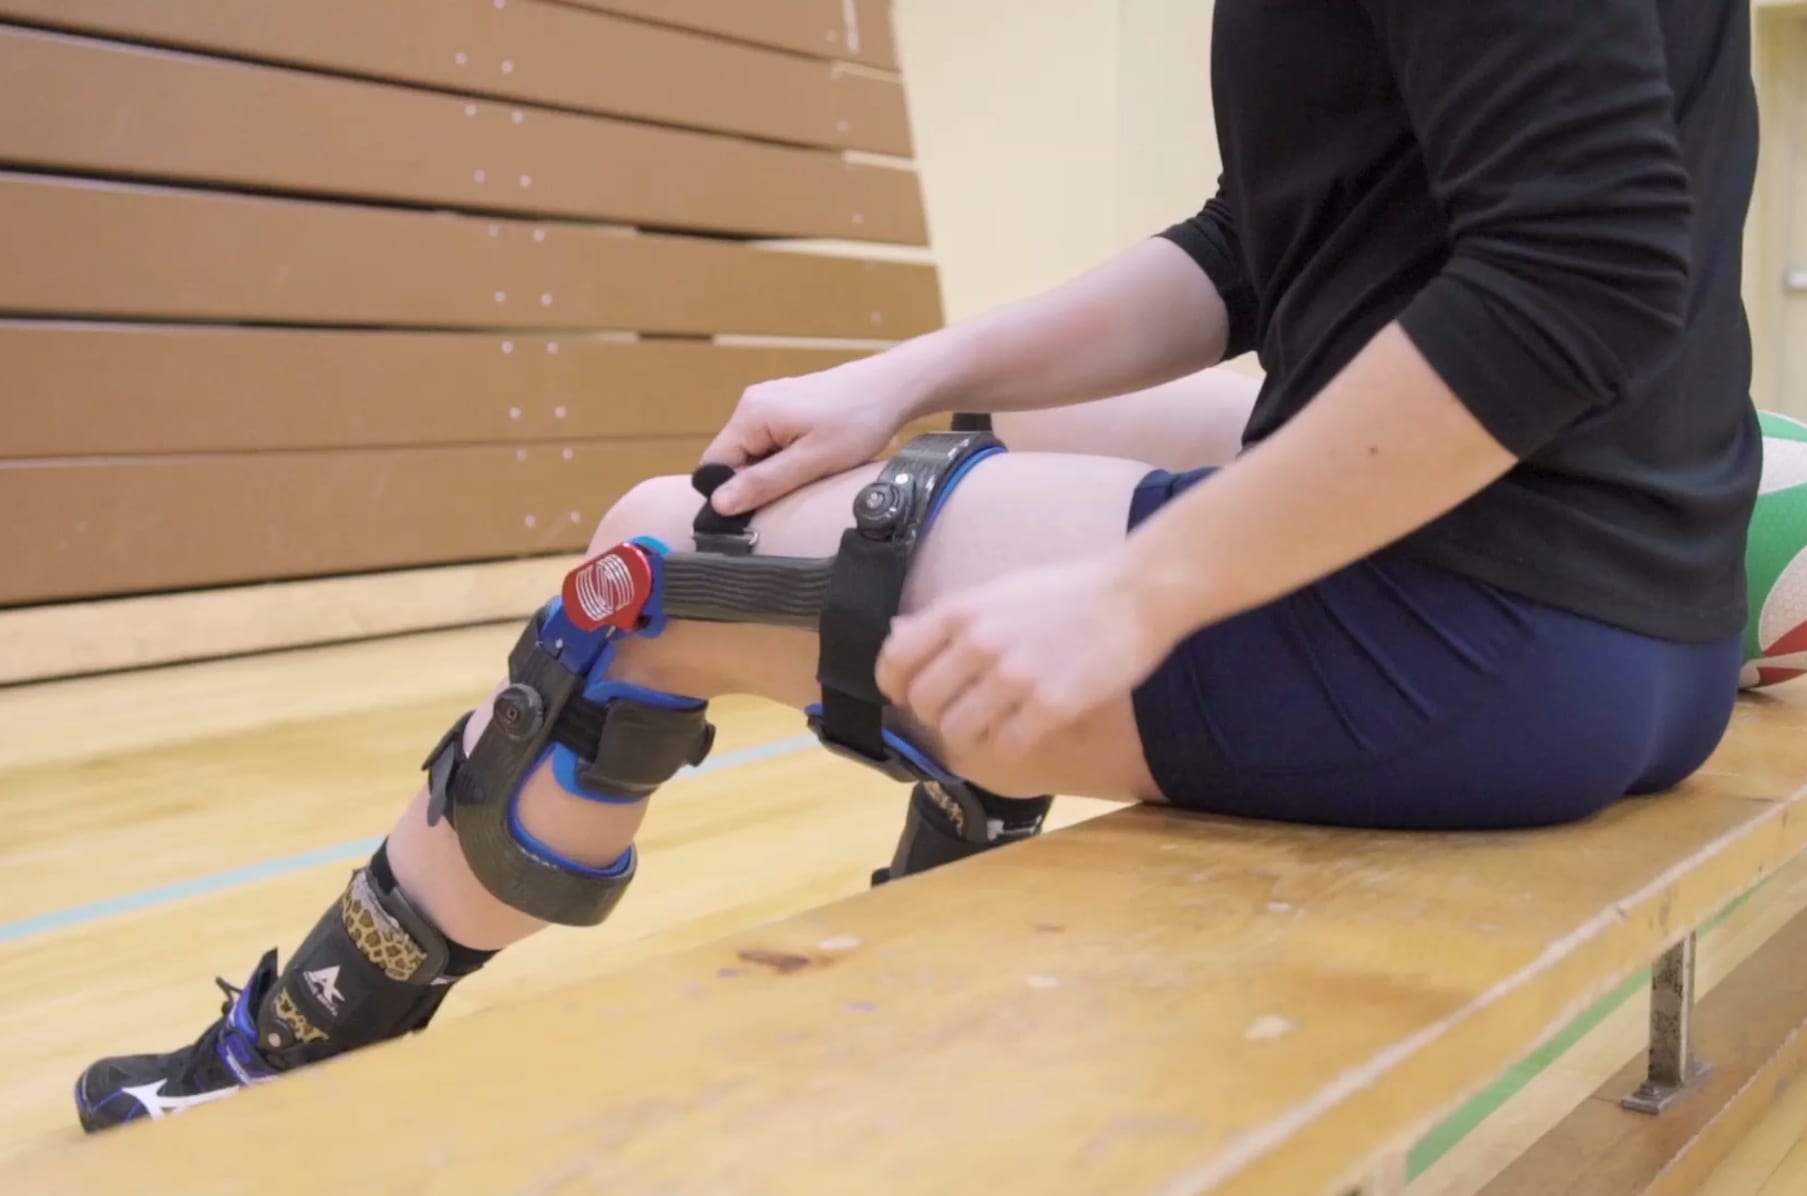 World's First Bionic Knee Brace by Spring Loaded